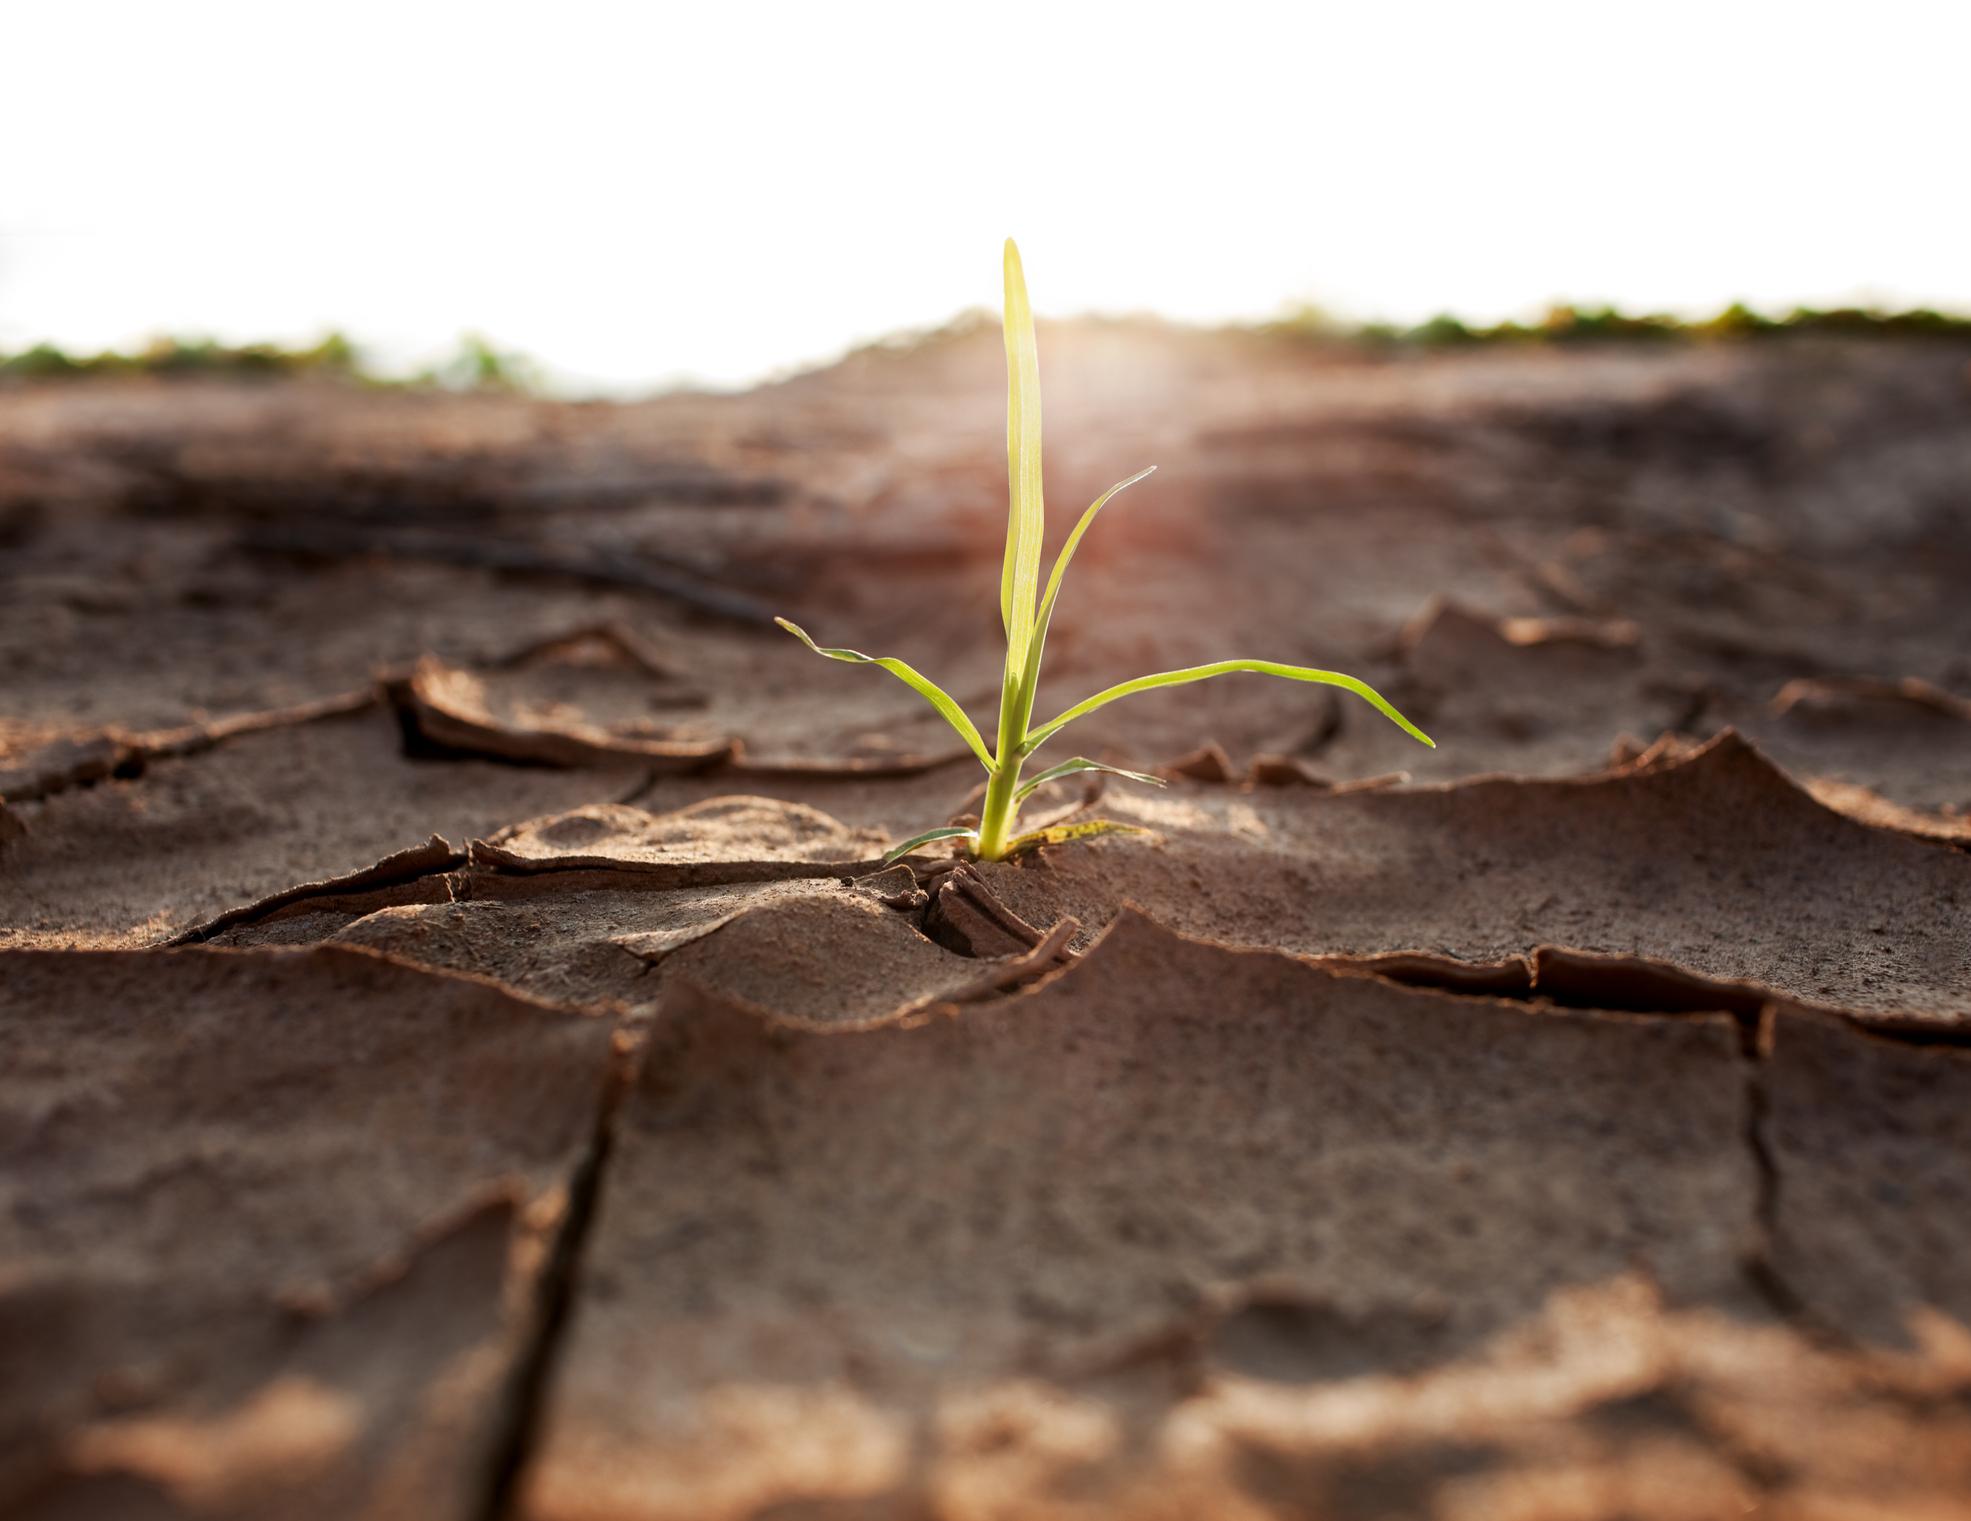 A plant shoot growing through dry earth